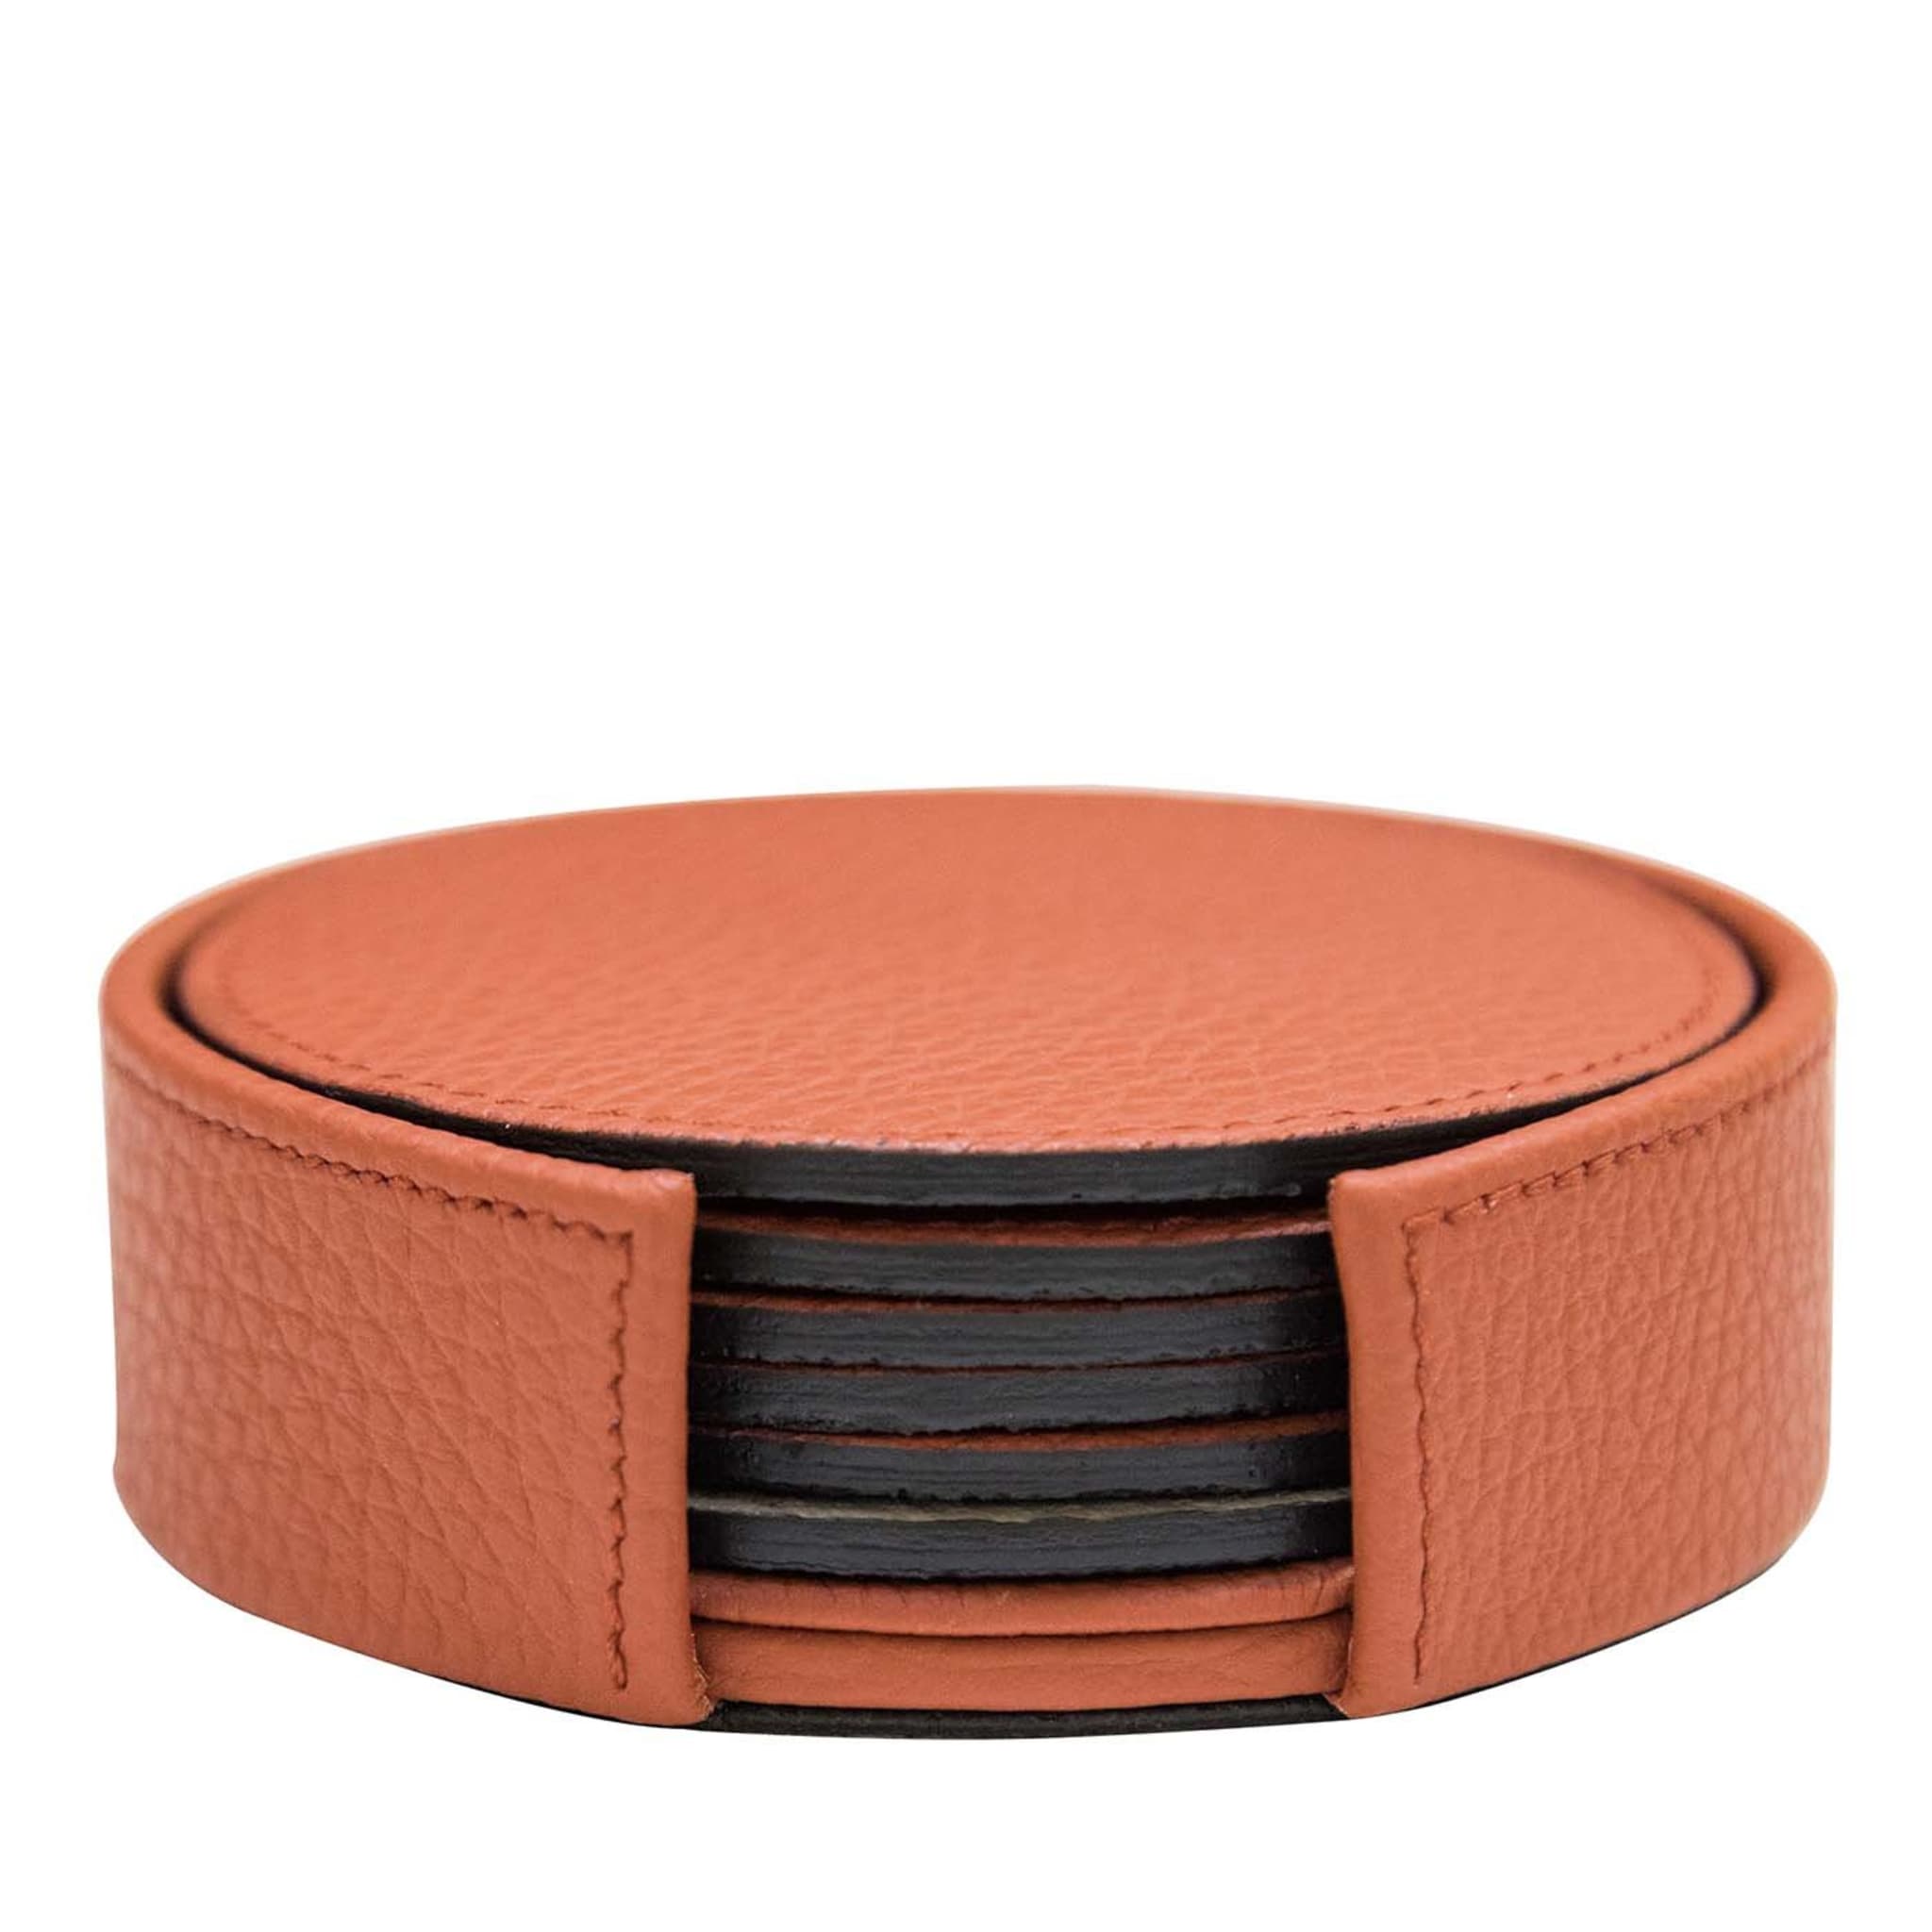 Set of 6 Leather Coasters in Orange - Main view